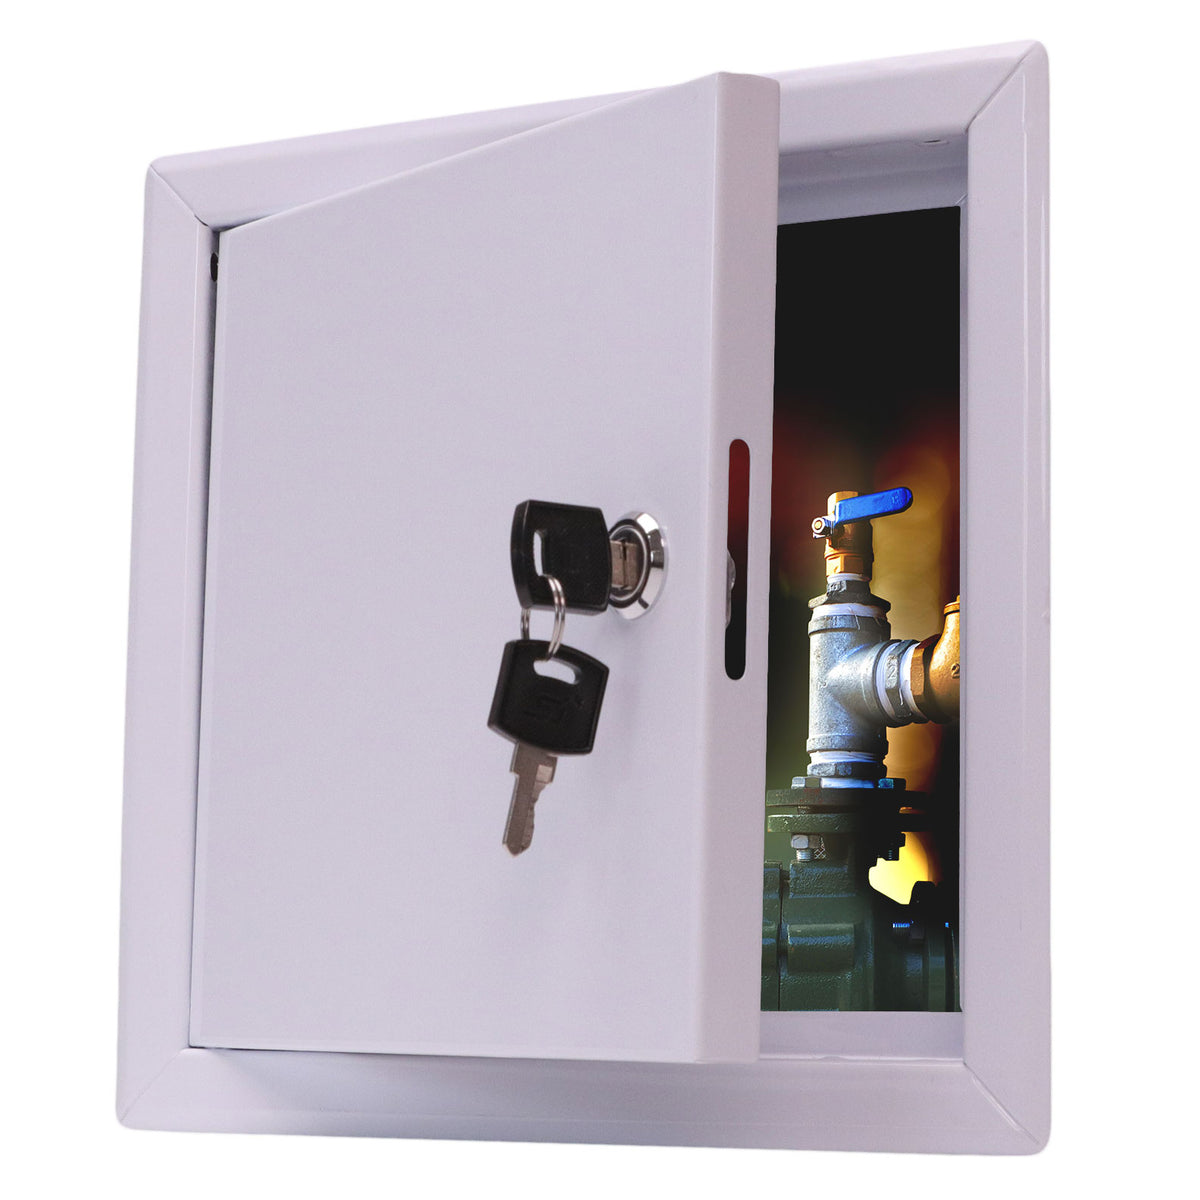 8&quot; X 8&quot; Steel Access Panel Removable Door For Wall / Ceiling Application (Lock and Key) With Frame - [Outer Dimensions: 9&quot; Width X 9&quot; Height]